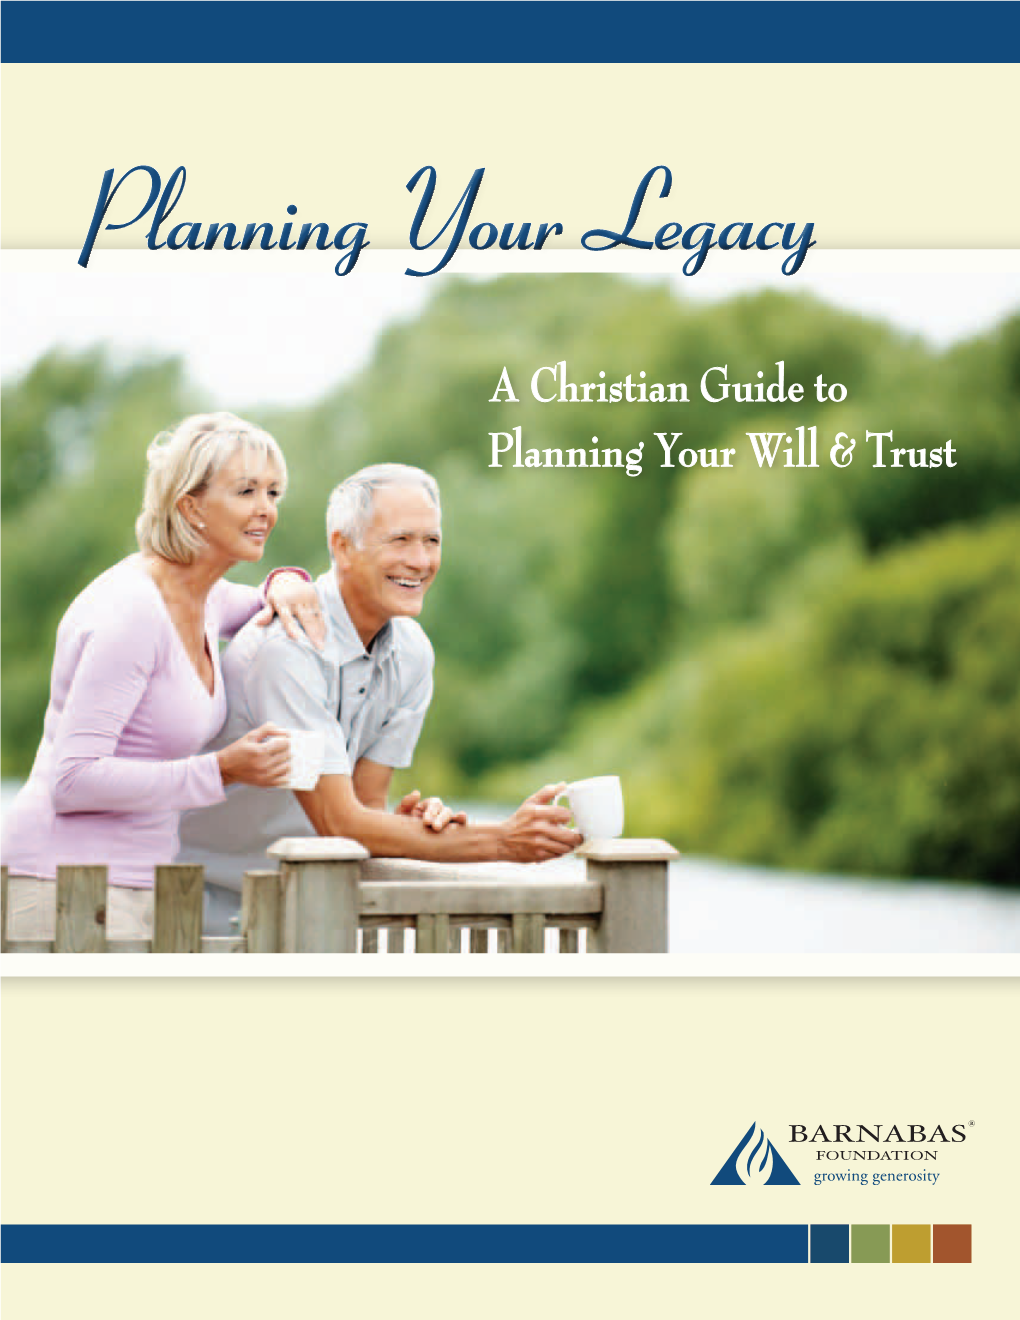 A Christian Guide to Planning Your Will & Trust